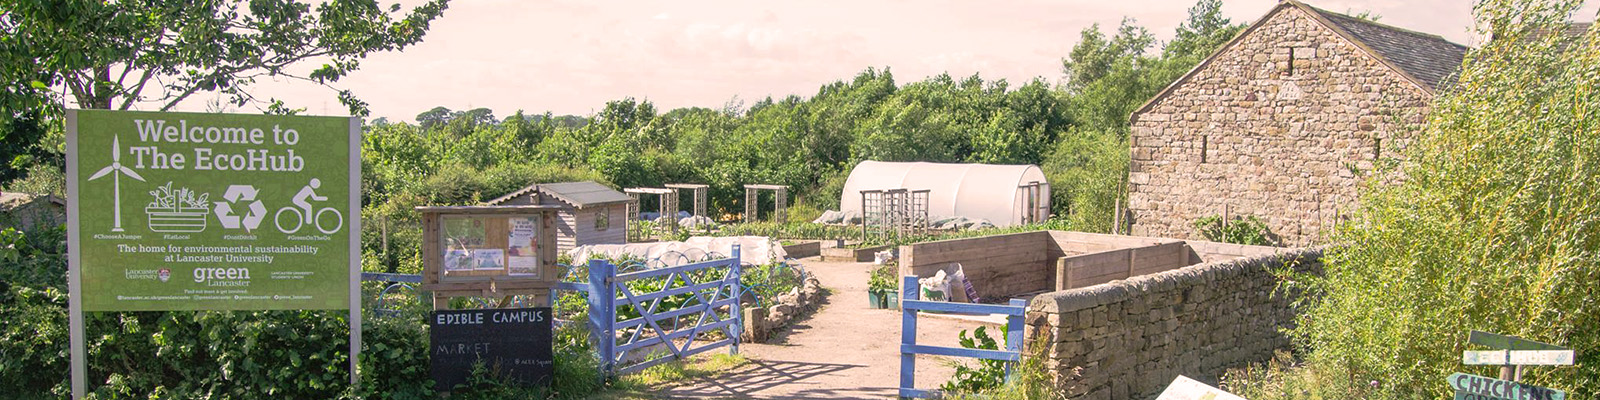 An image of the barn and allotment at the ECOHub on Southwest Campus